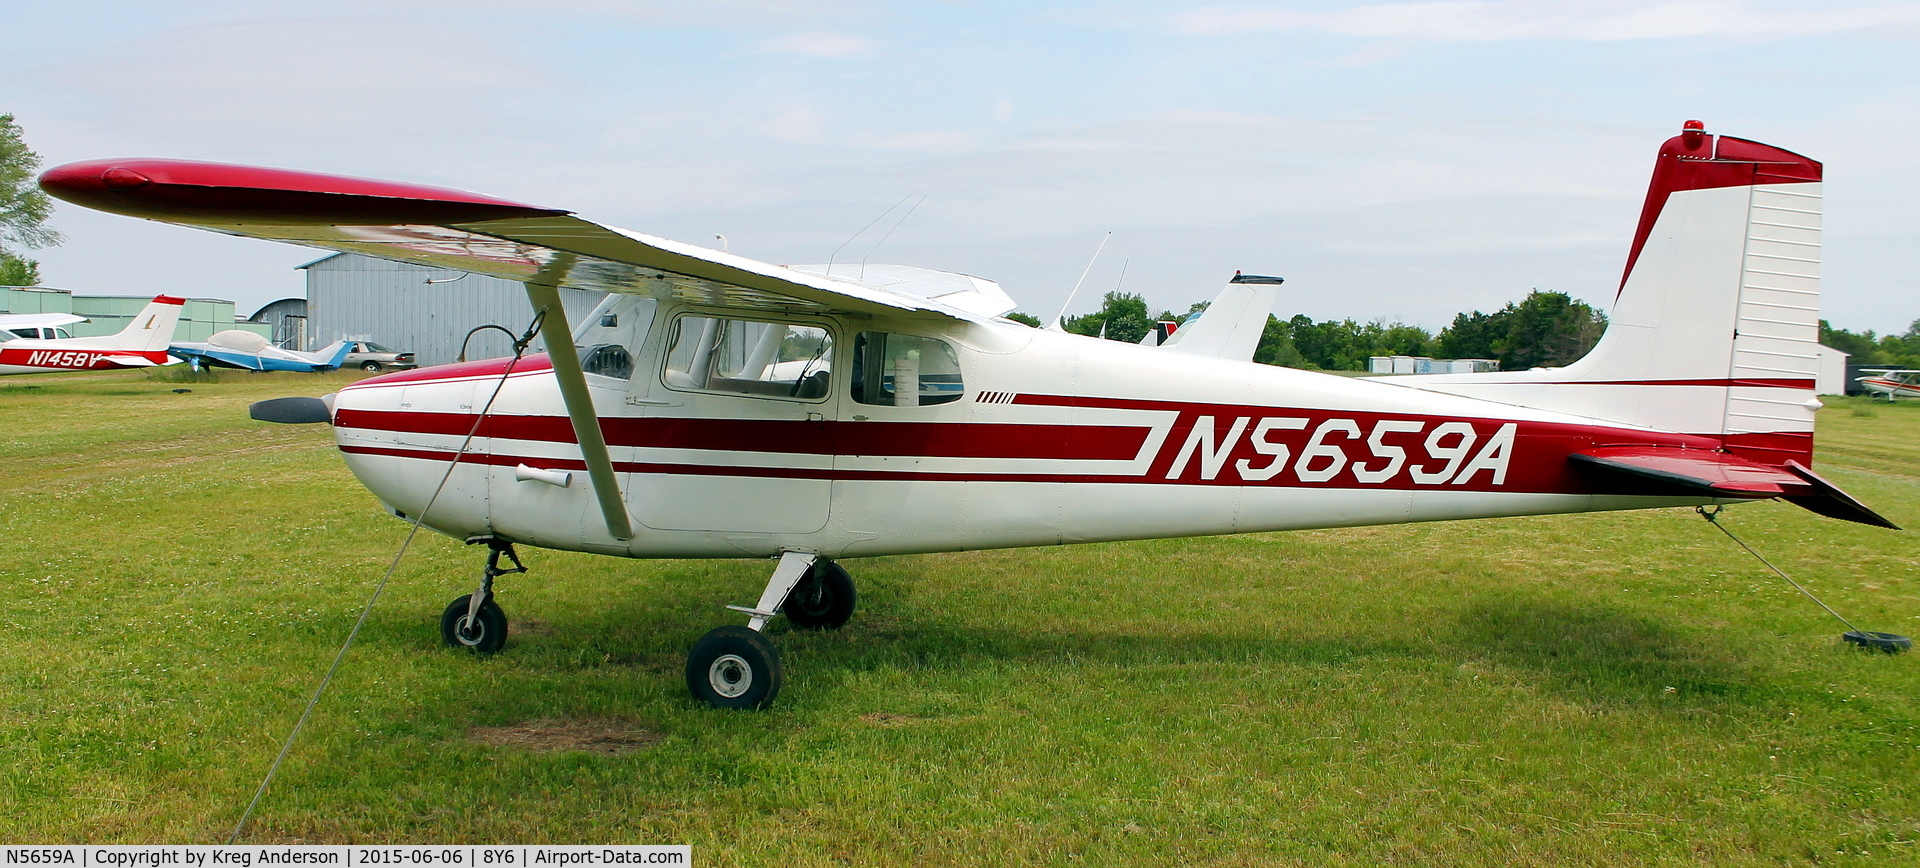 N5659A, 1957 Cessna 172 C/N 28259, EAA Chapter 551 Bean and Brat Fly-in